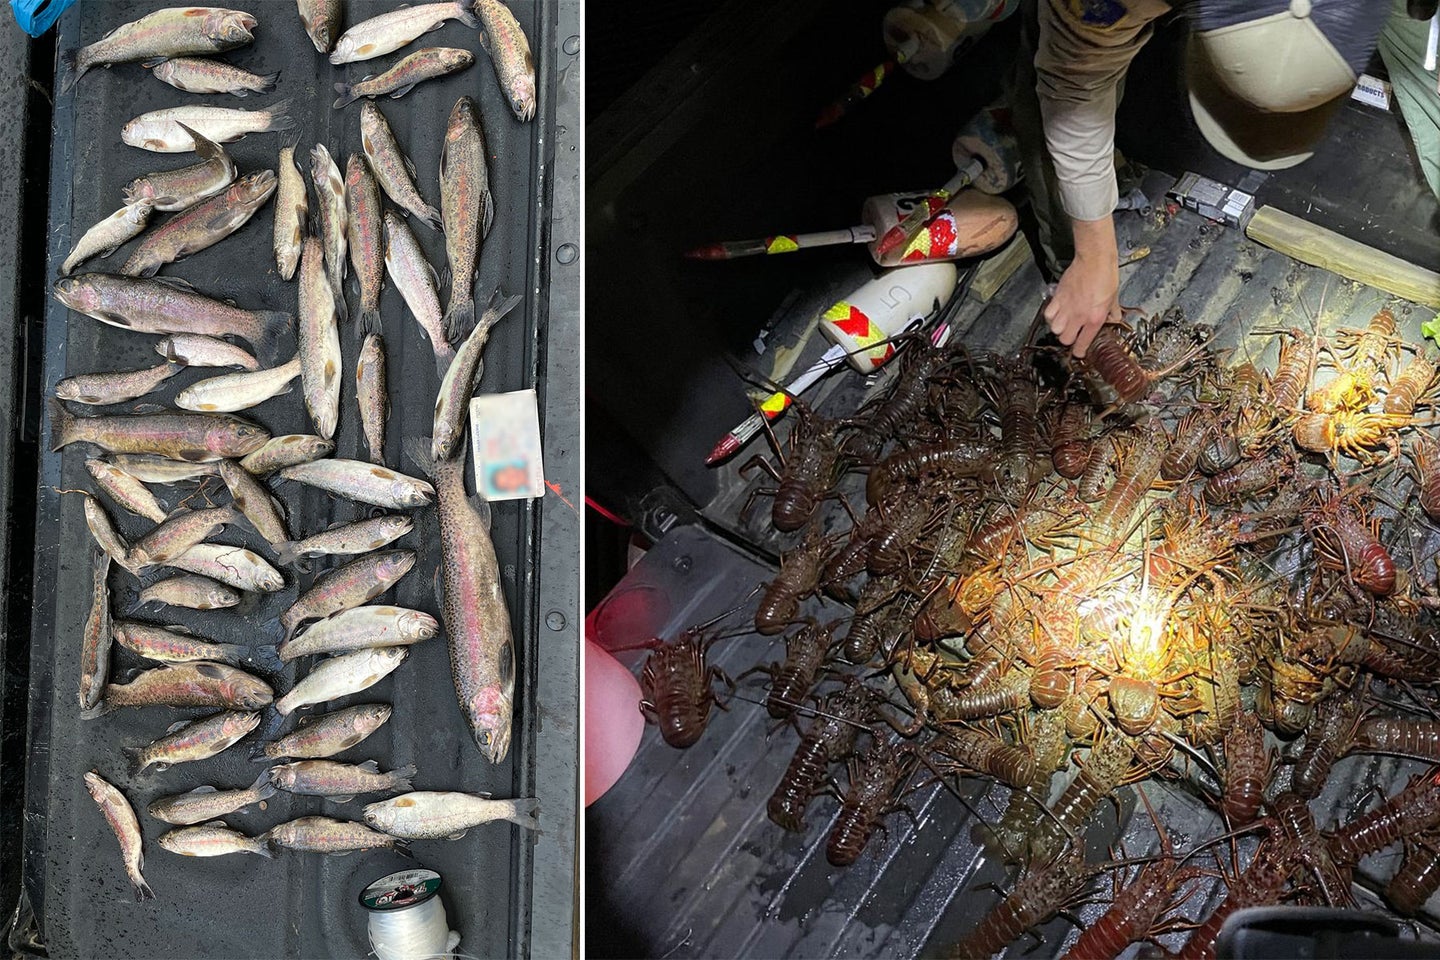 Trout and lobsters seized by California game wardens.